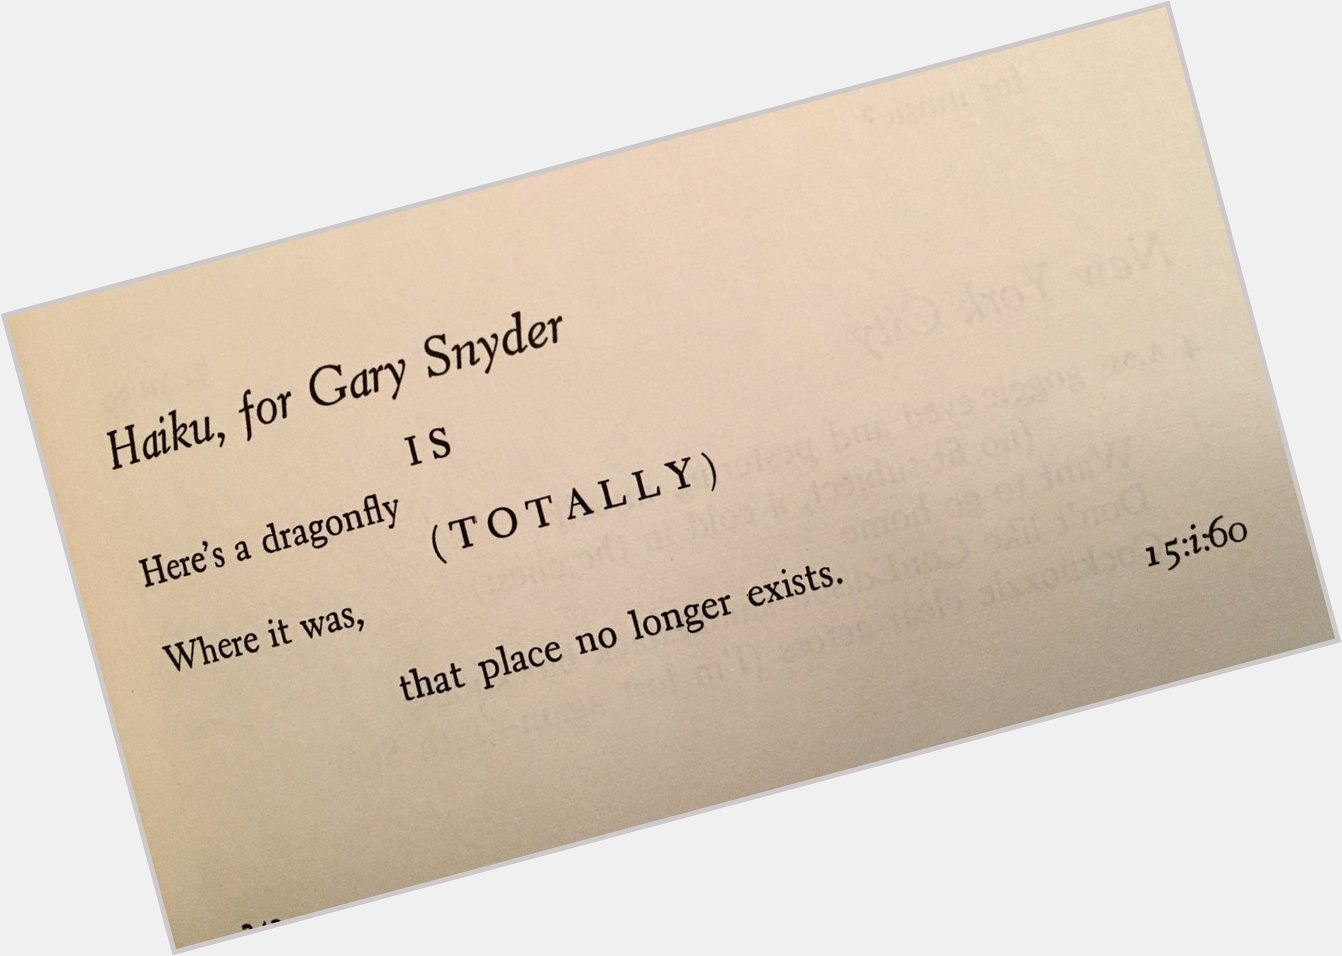 Happy 90th birthday to Gary Snyder!  Here s a poem Philip Whalen wrote for him 60 years ago. 